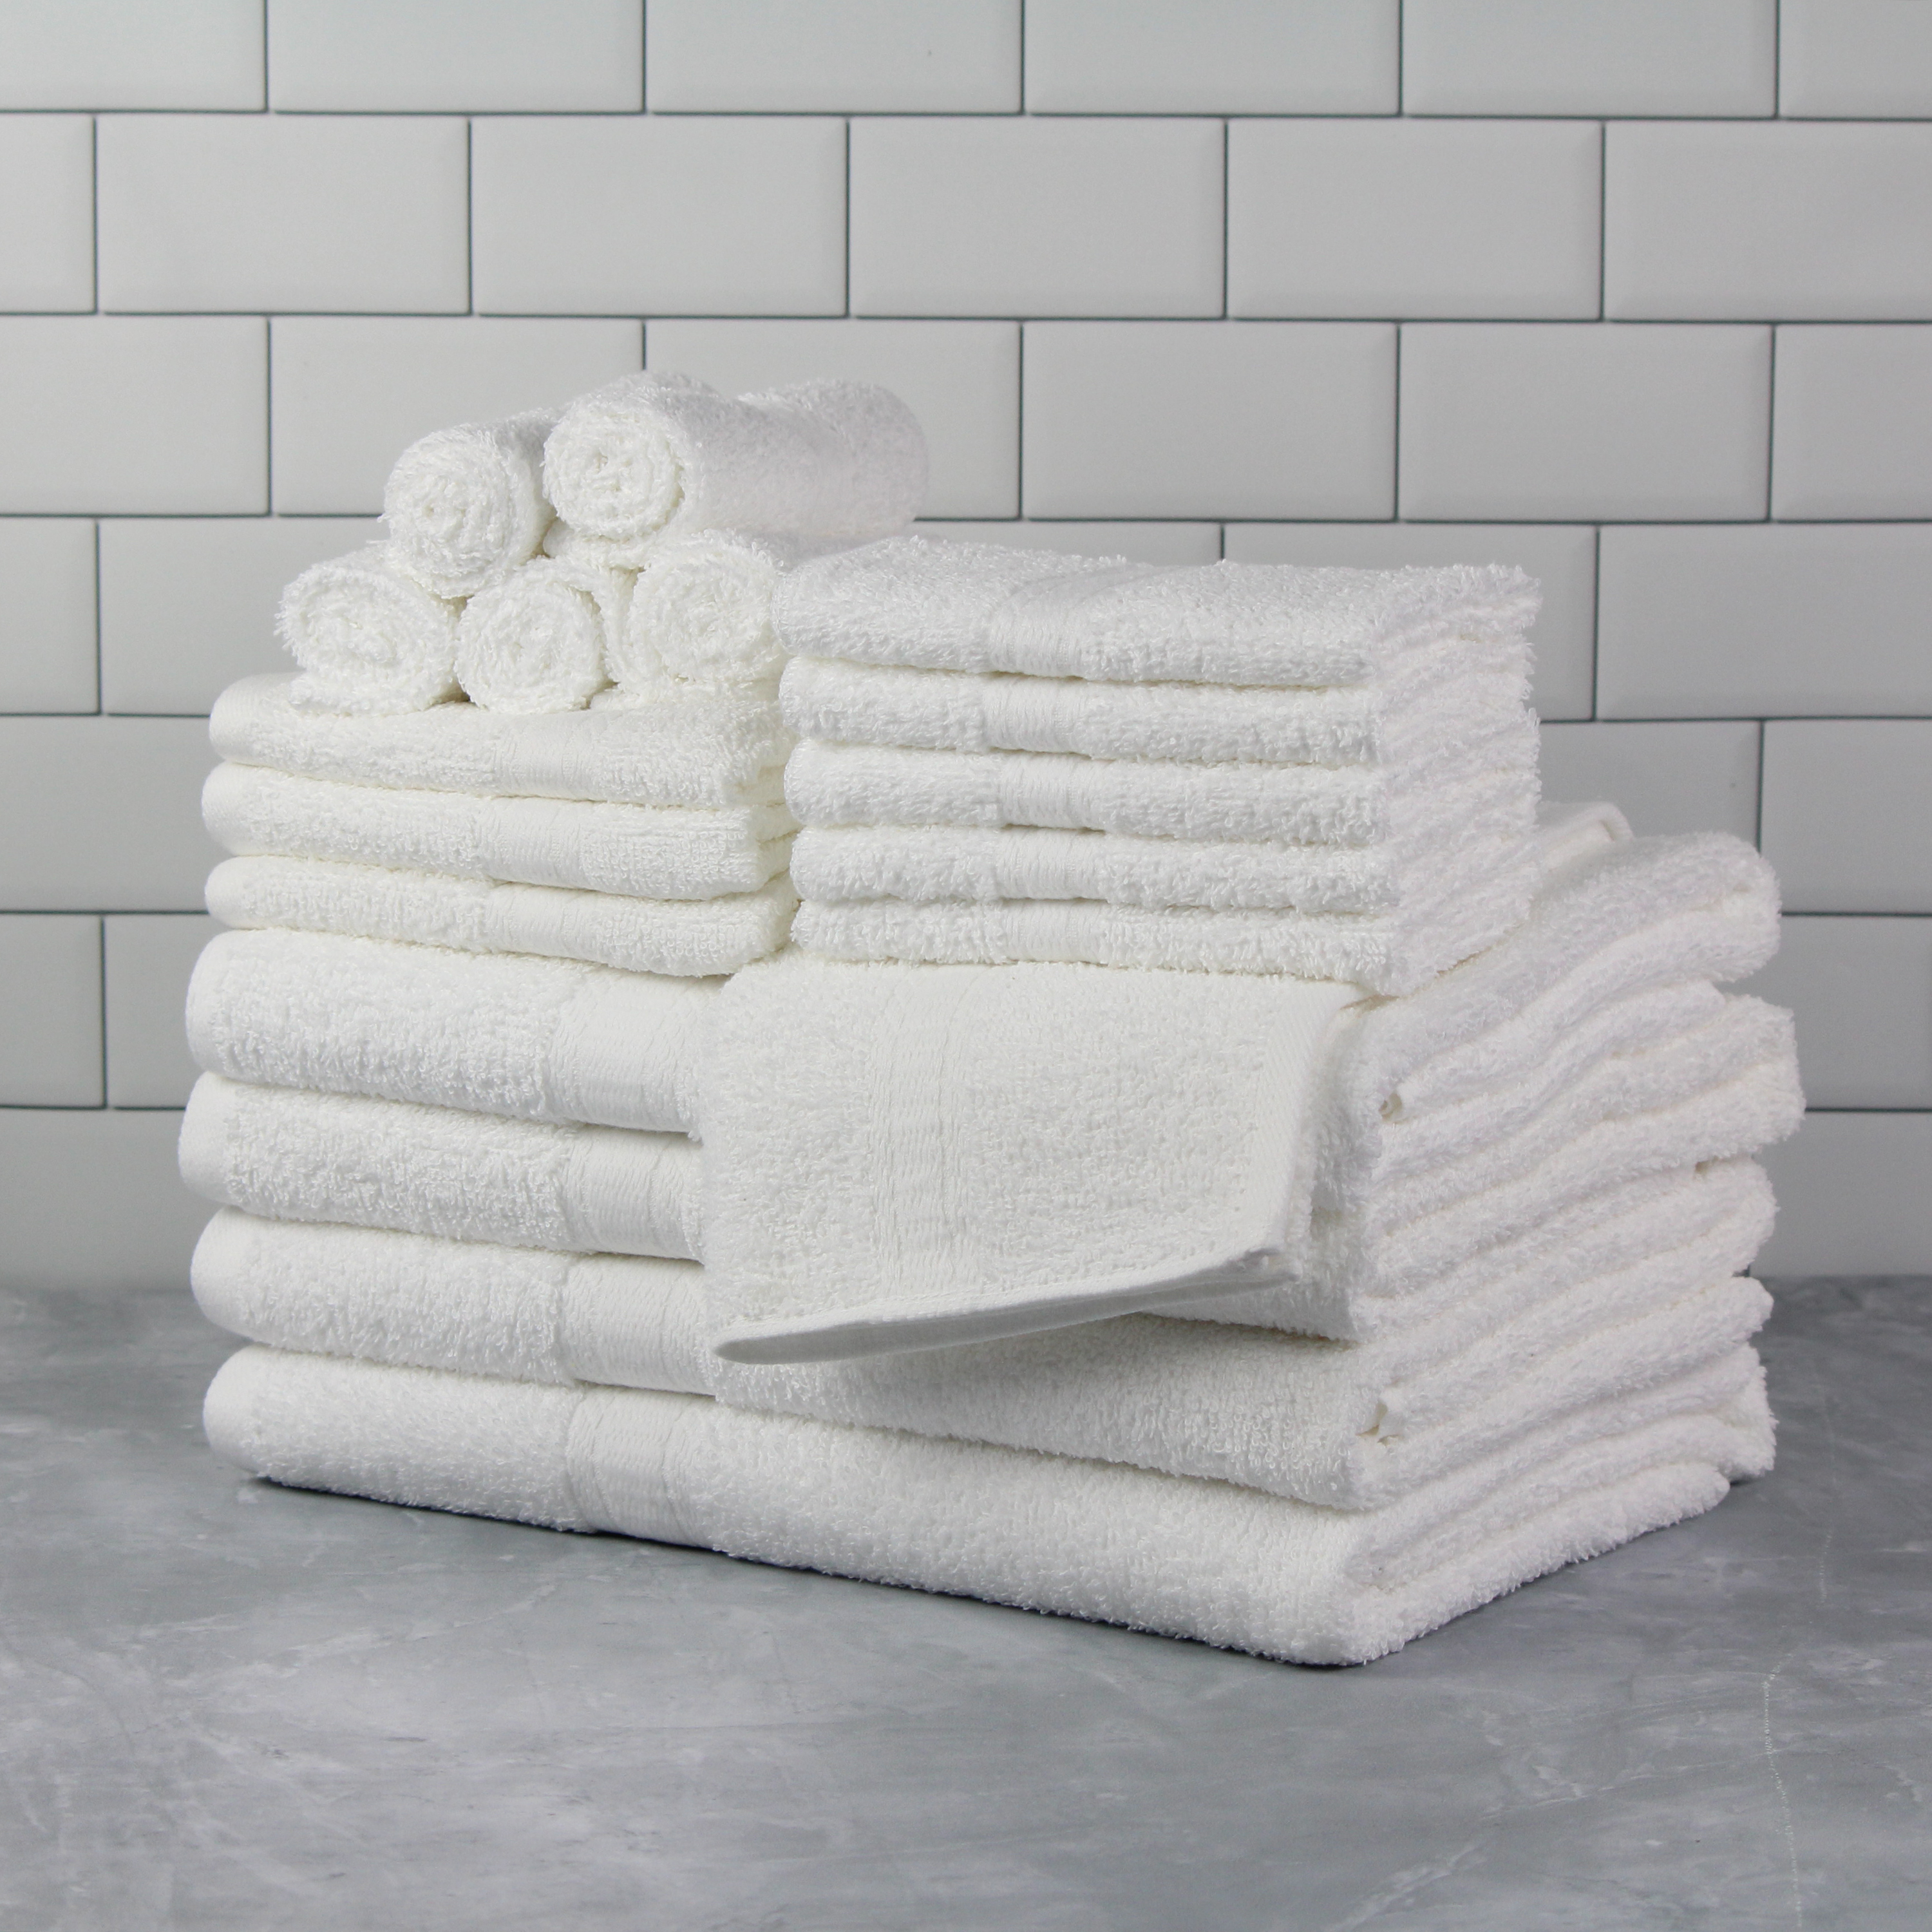 Mainstays Basic Solid 18-Piece Bath Towel Set Collection, White - image 2 of 10